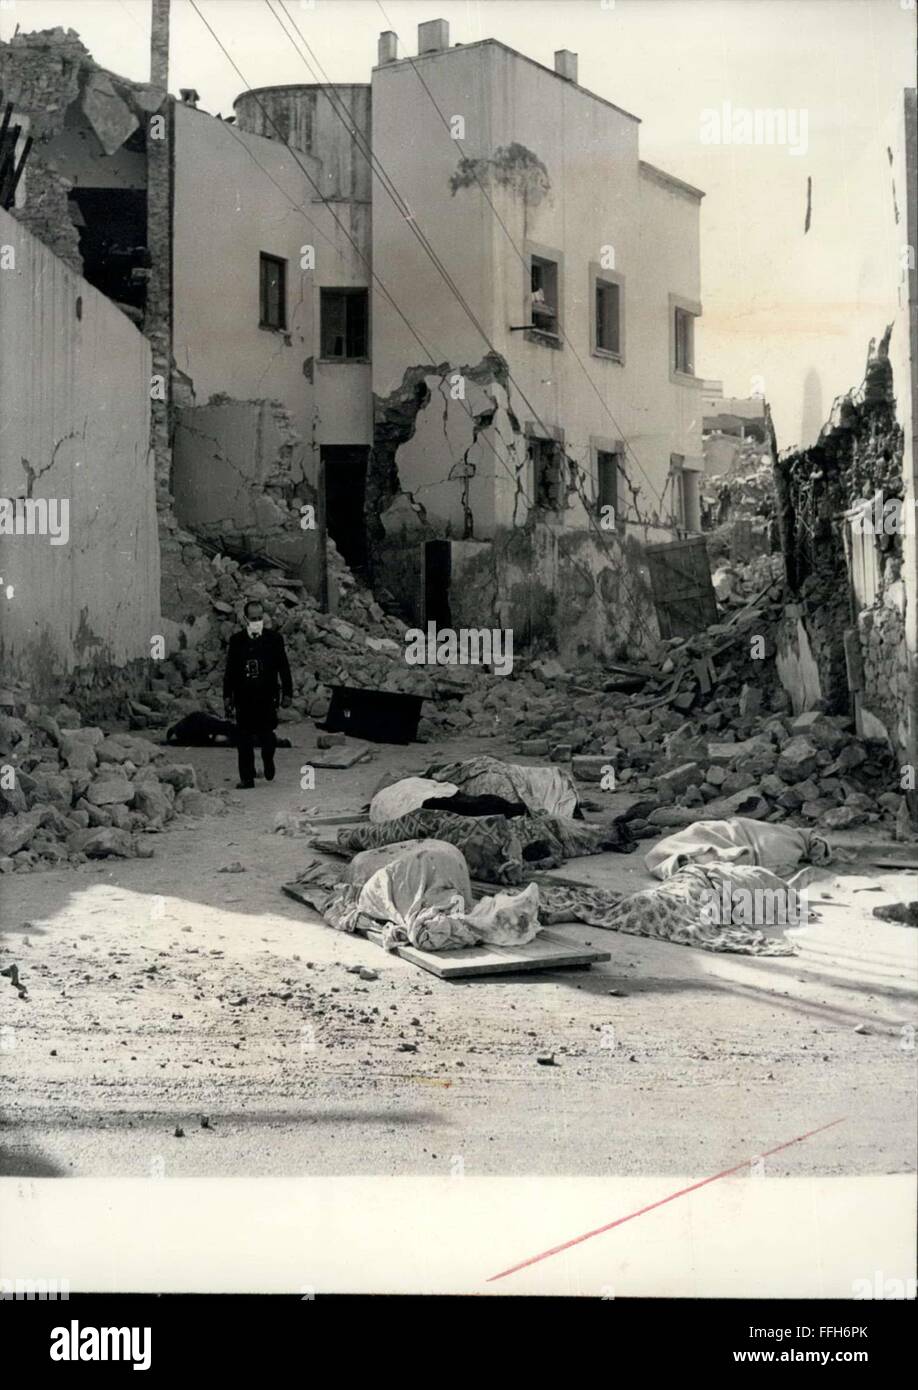 1966 - Bodies of Victims covered up with Blankets lying in the rabble. In the bacground a photographer wearing a mask as a protection against the heavy smell from corpses in putrefaction. Earthquake © Keystone Pictures USA/ZUMAPRESS.com/Alamy Live News Stock Photo